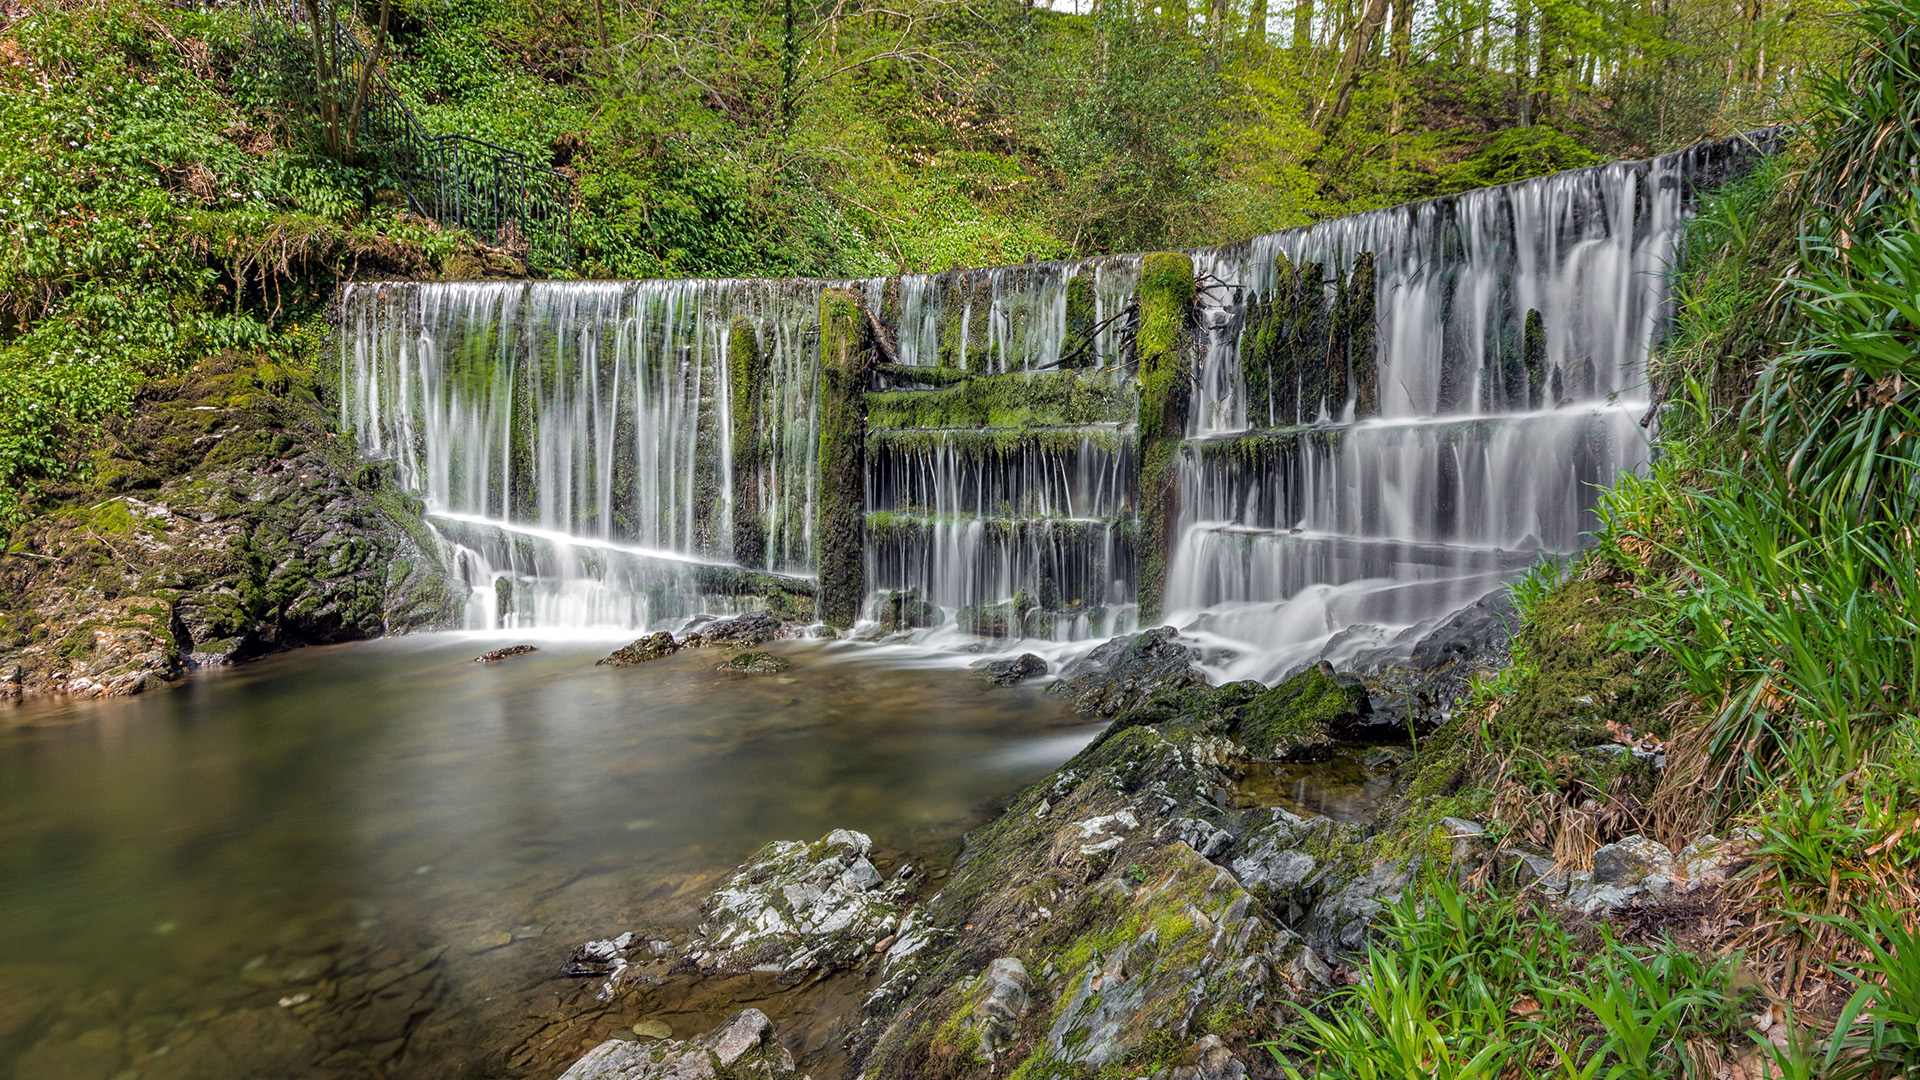 Stock Ghyll